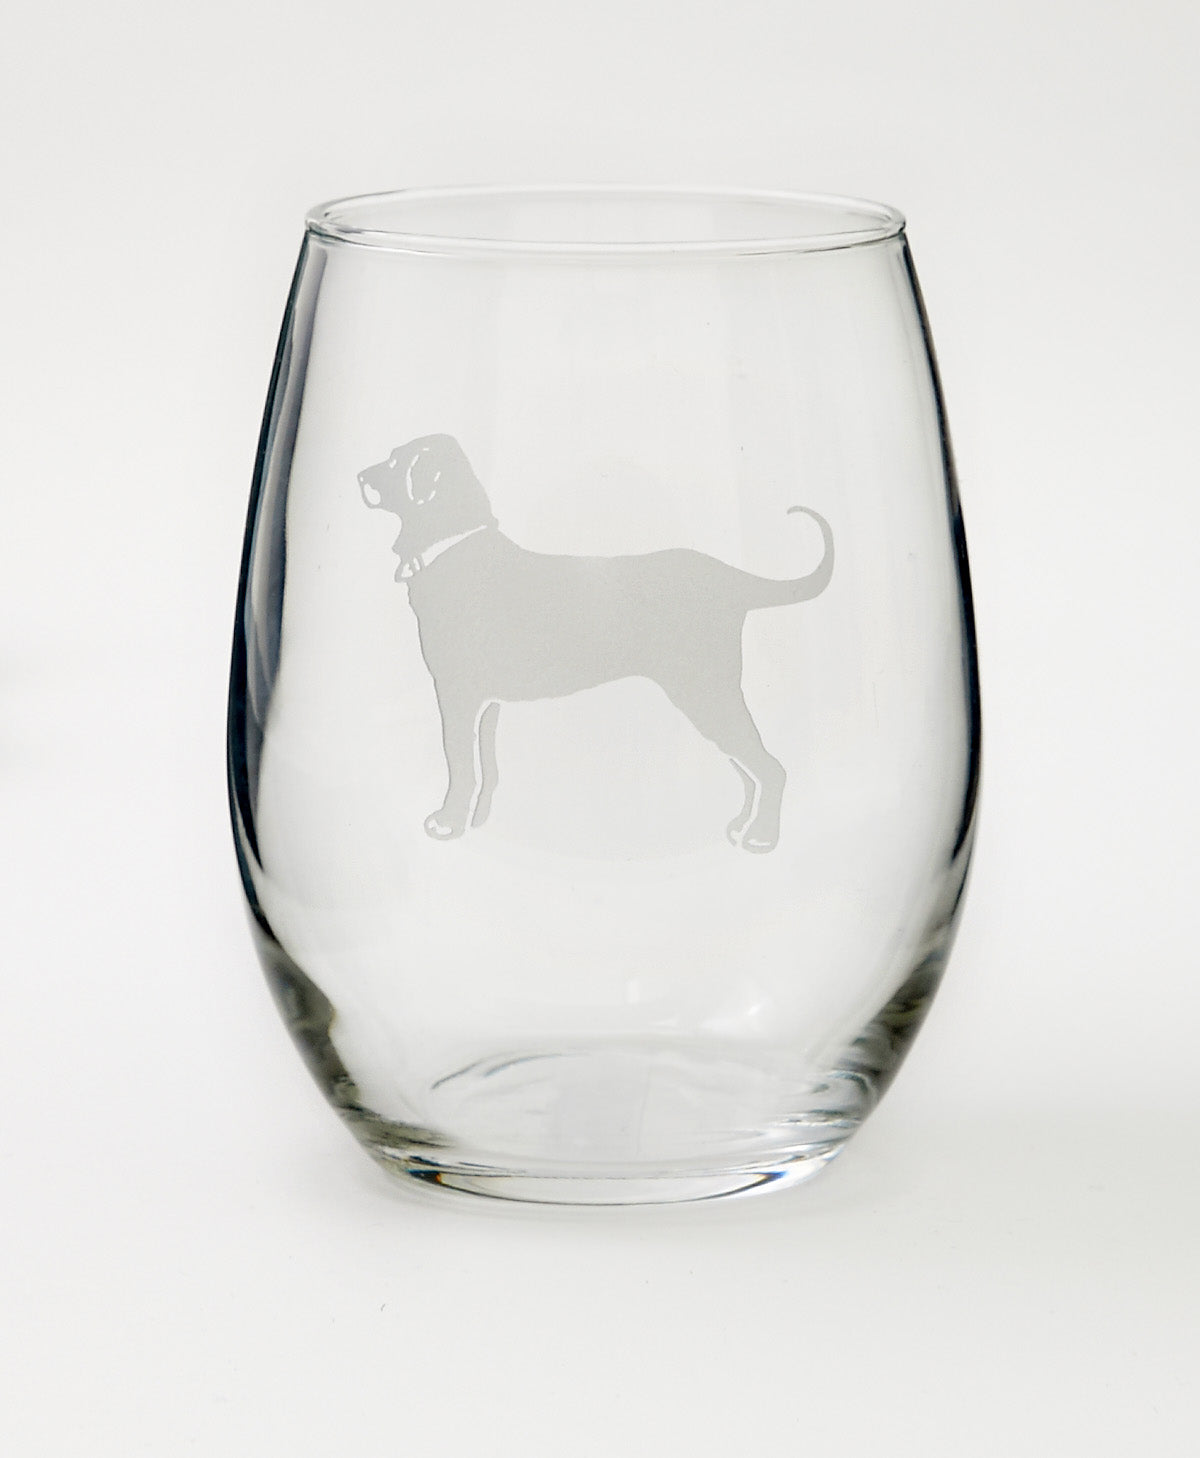 Etched Stemless Wineglass